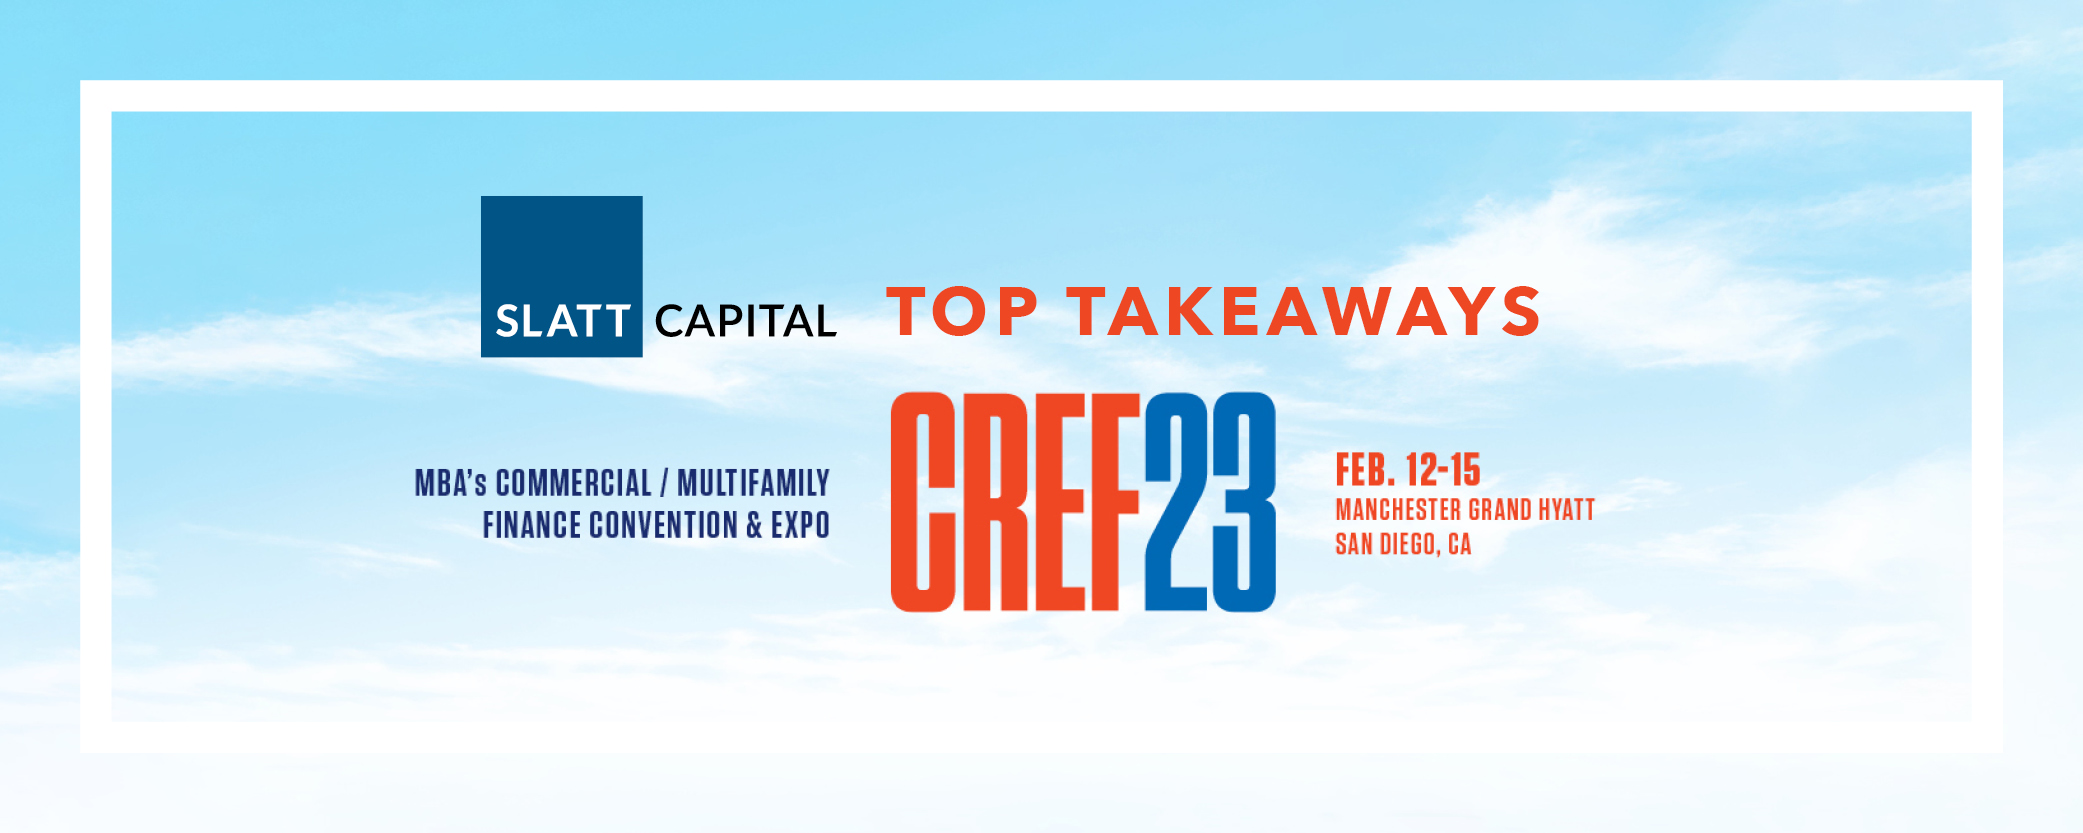 Top takeaways: mba cref conference 2023